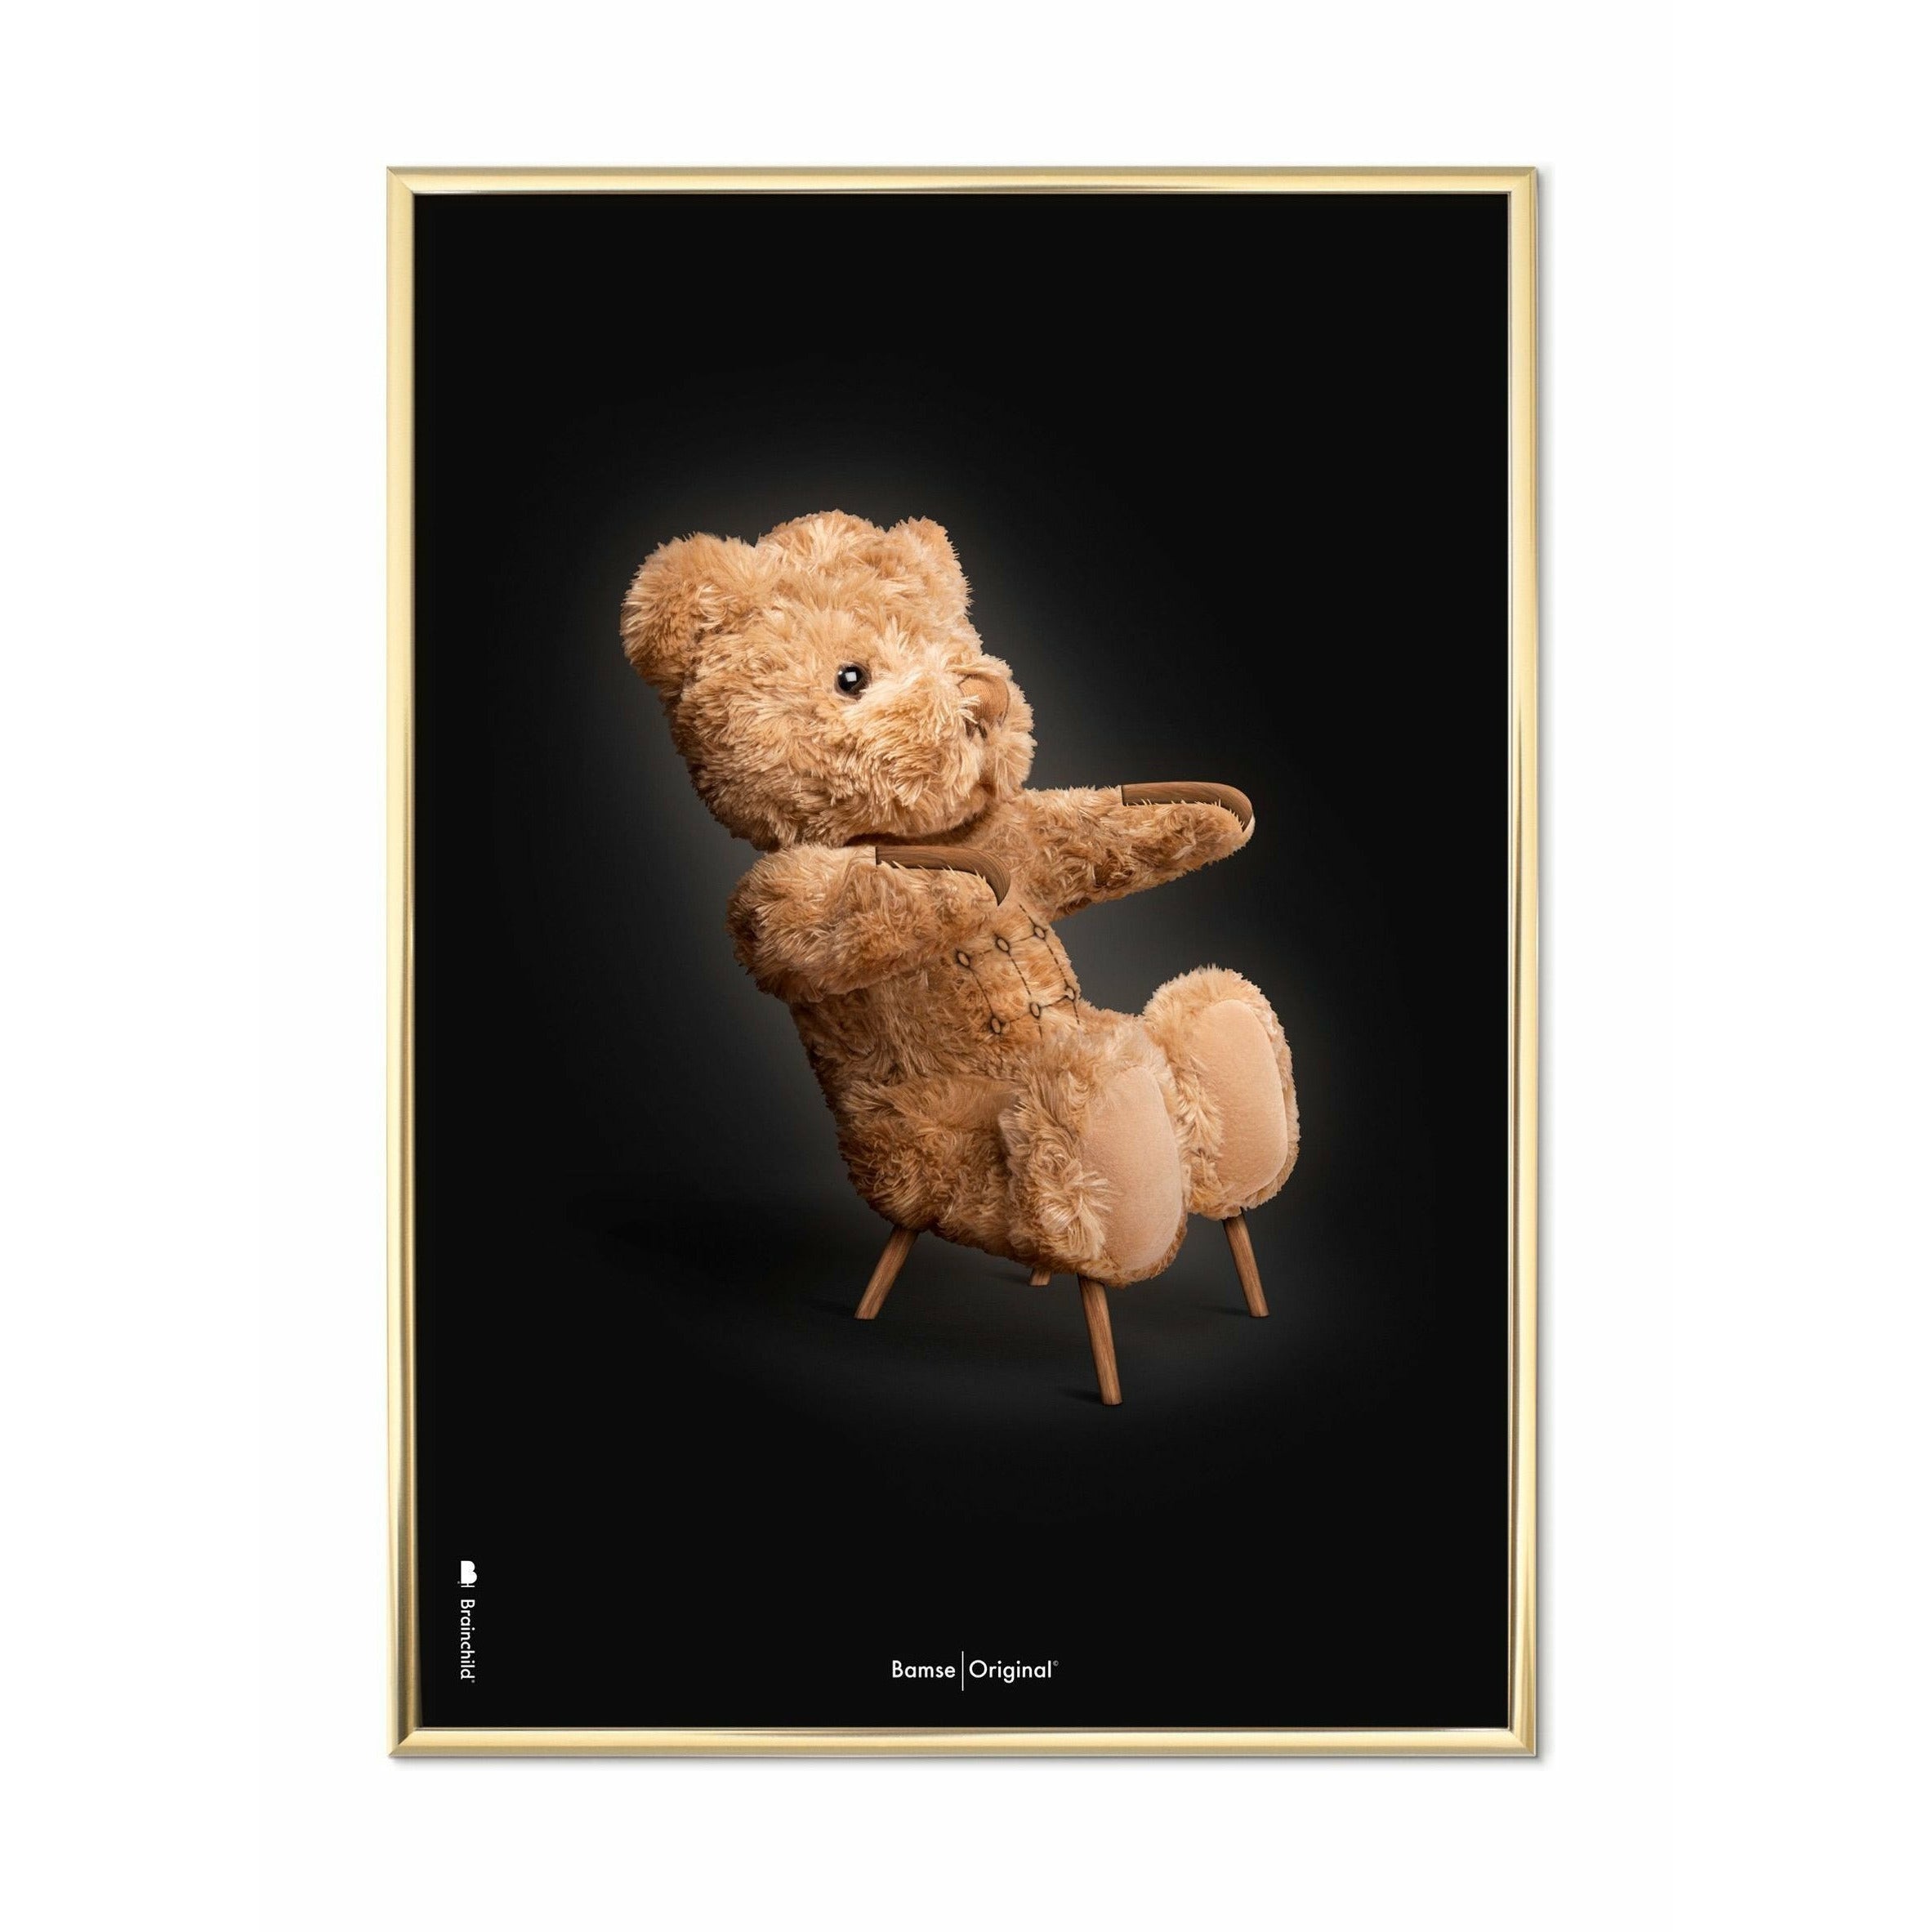 Brainchild Teddy Bear Classic Poster, Brass Colored Frame A5, Black Background